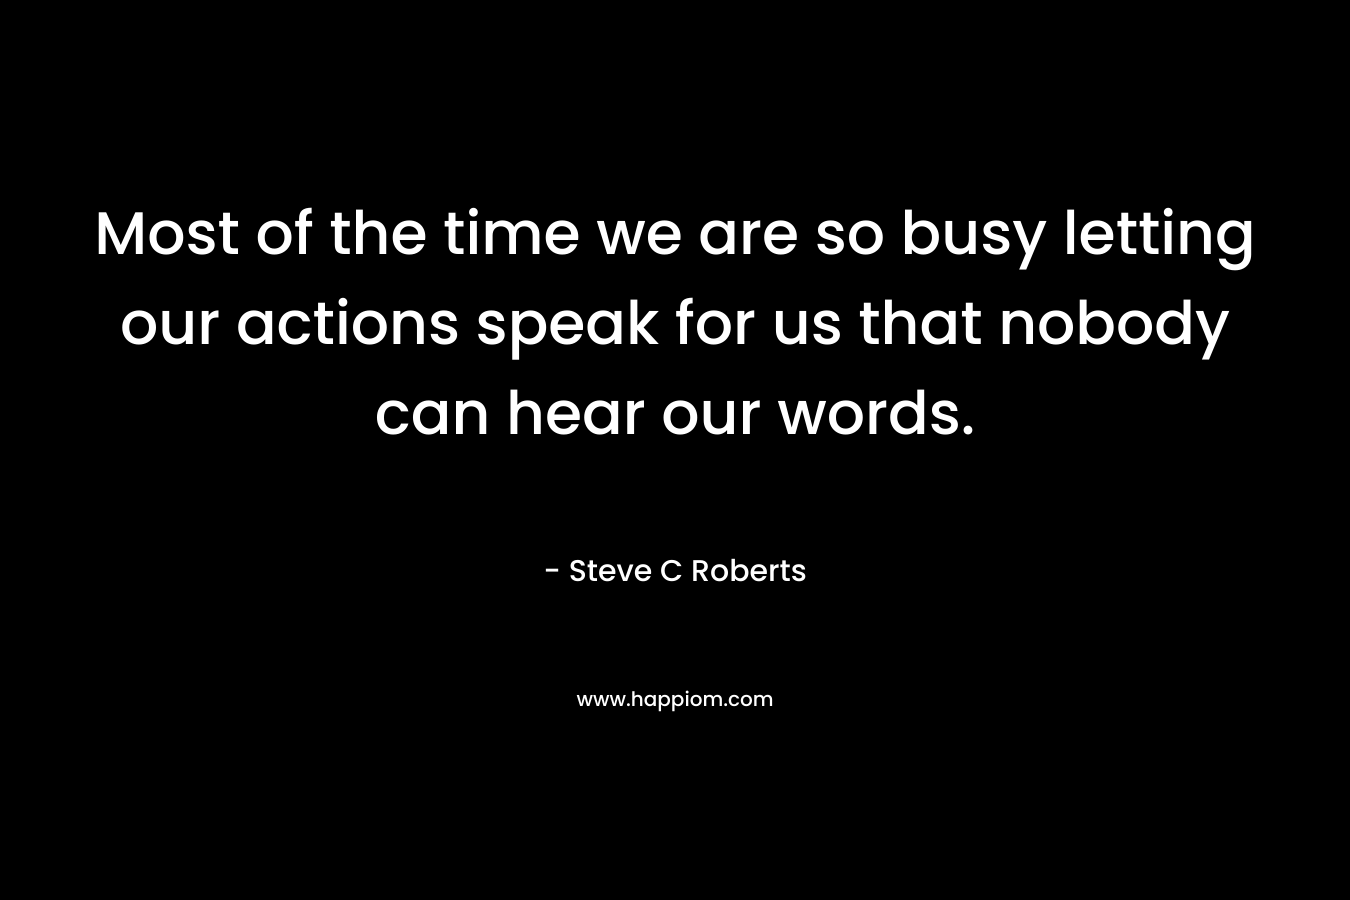 Most of the time we are so busy letting our actions speak for us that nobody can hear our words.